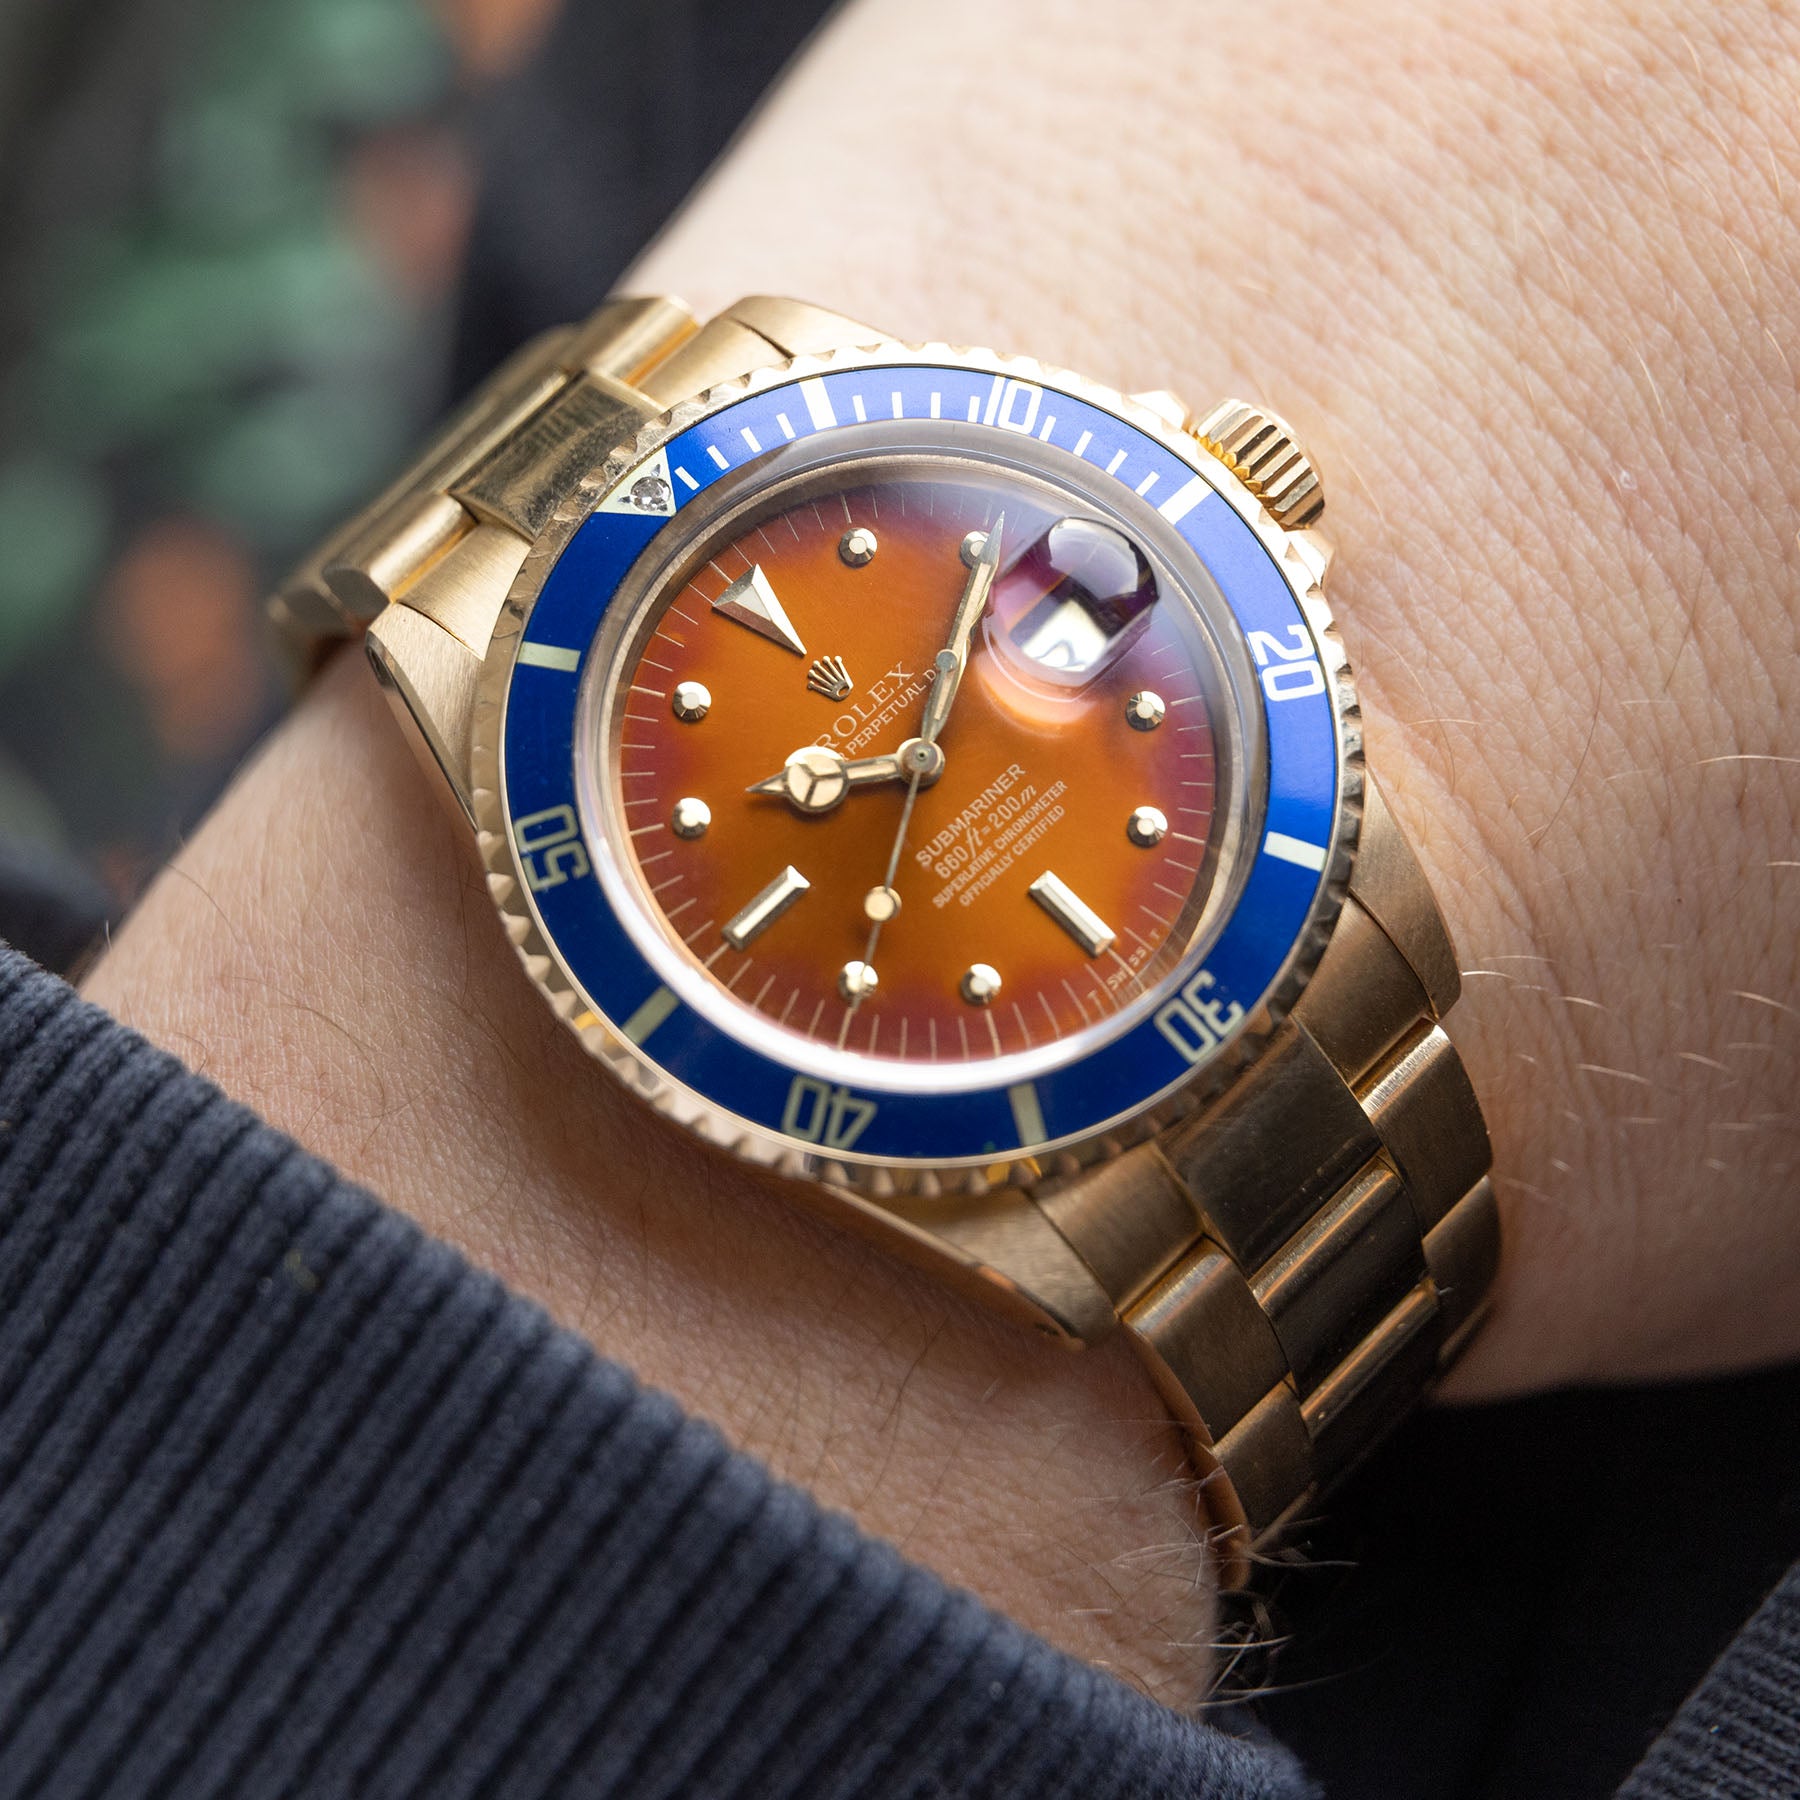 Rolex Submariner Date Yellow Gold 1680 / 8 Tropical Dial